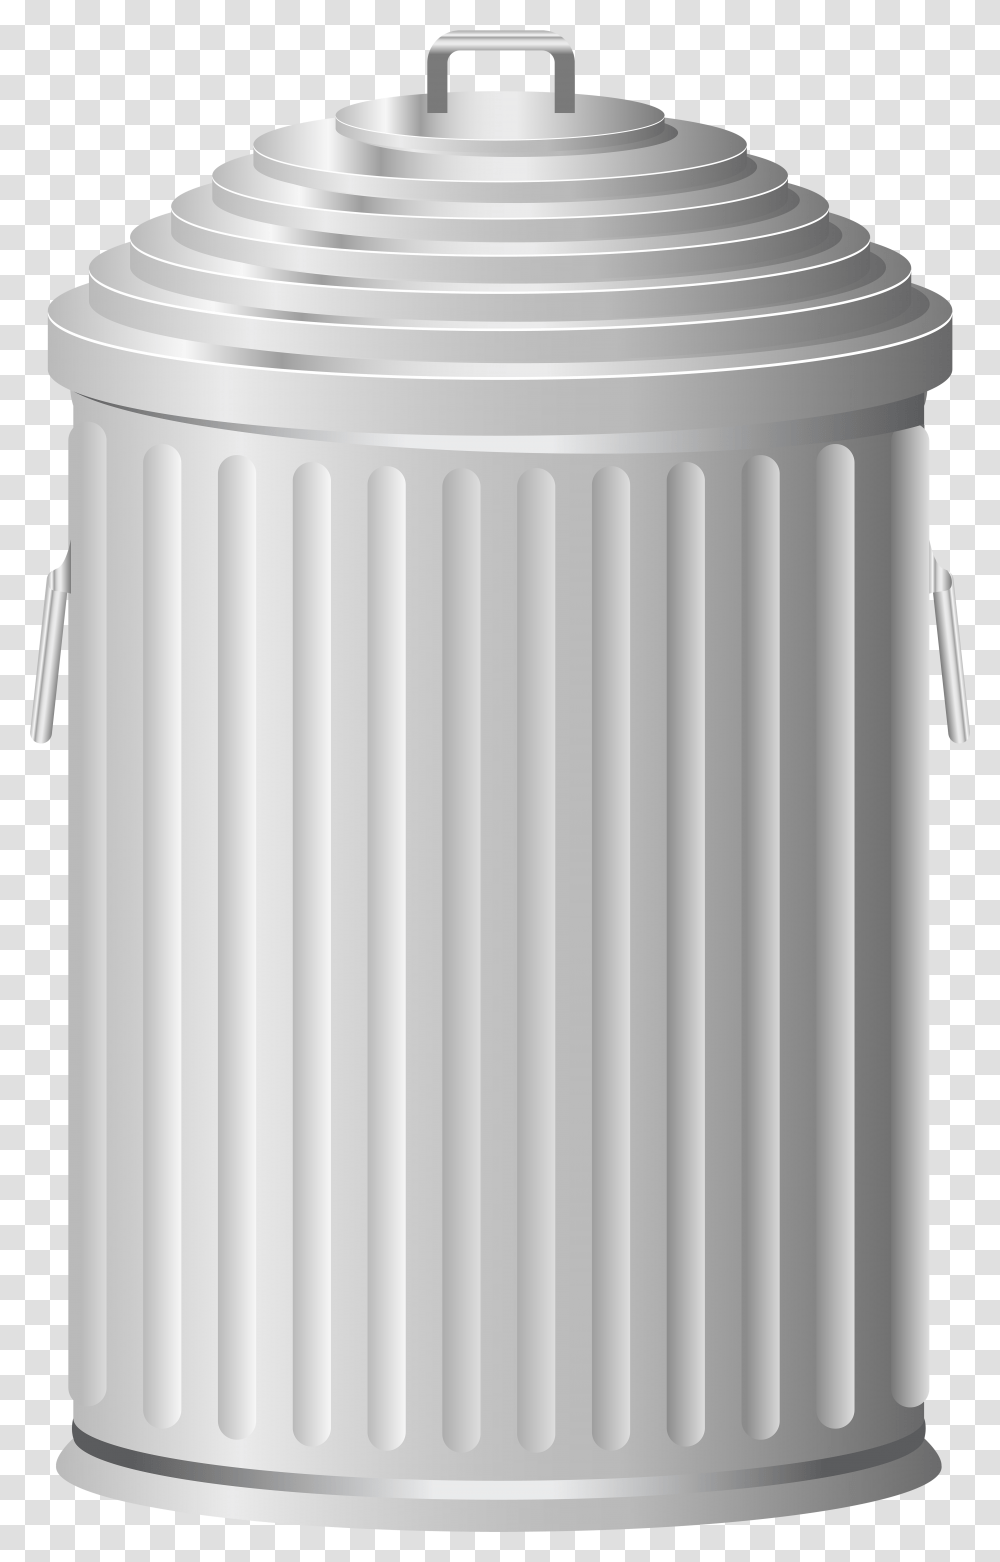 Metal Trash Can Clip Art Image Waste Container, Architecture, Building, Pillar, Column Transparent Png